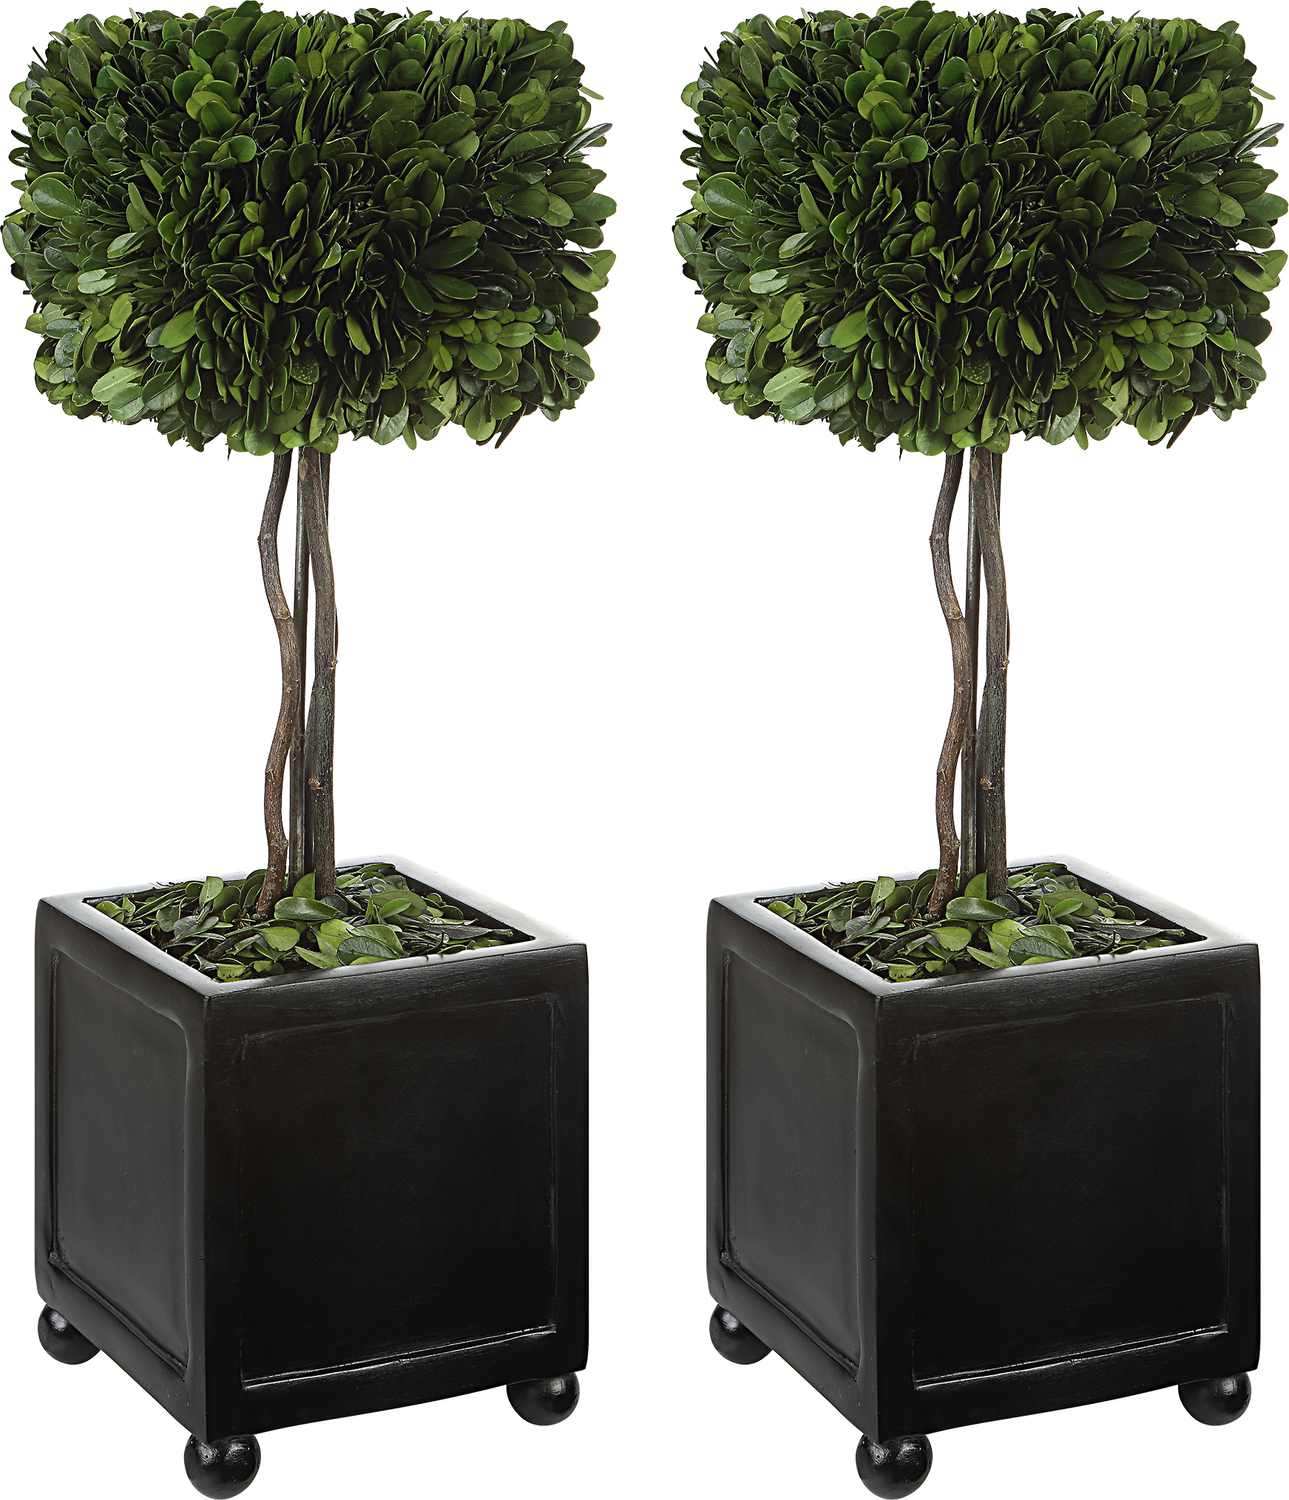 nice flower pots Uttermost Trees-Greenery Natural Evergreen Foliage Preserved While Freshly Picked, Looks And Feels Like Living Boxwood. Supported By Natural Willow Branches, Two Square Topiaries Are Potted In Contemporary Ball Footed Planters Finished In Satin Black. For Indoor Use Only.